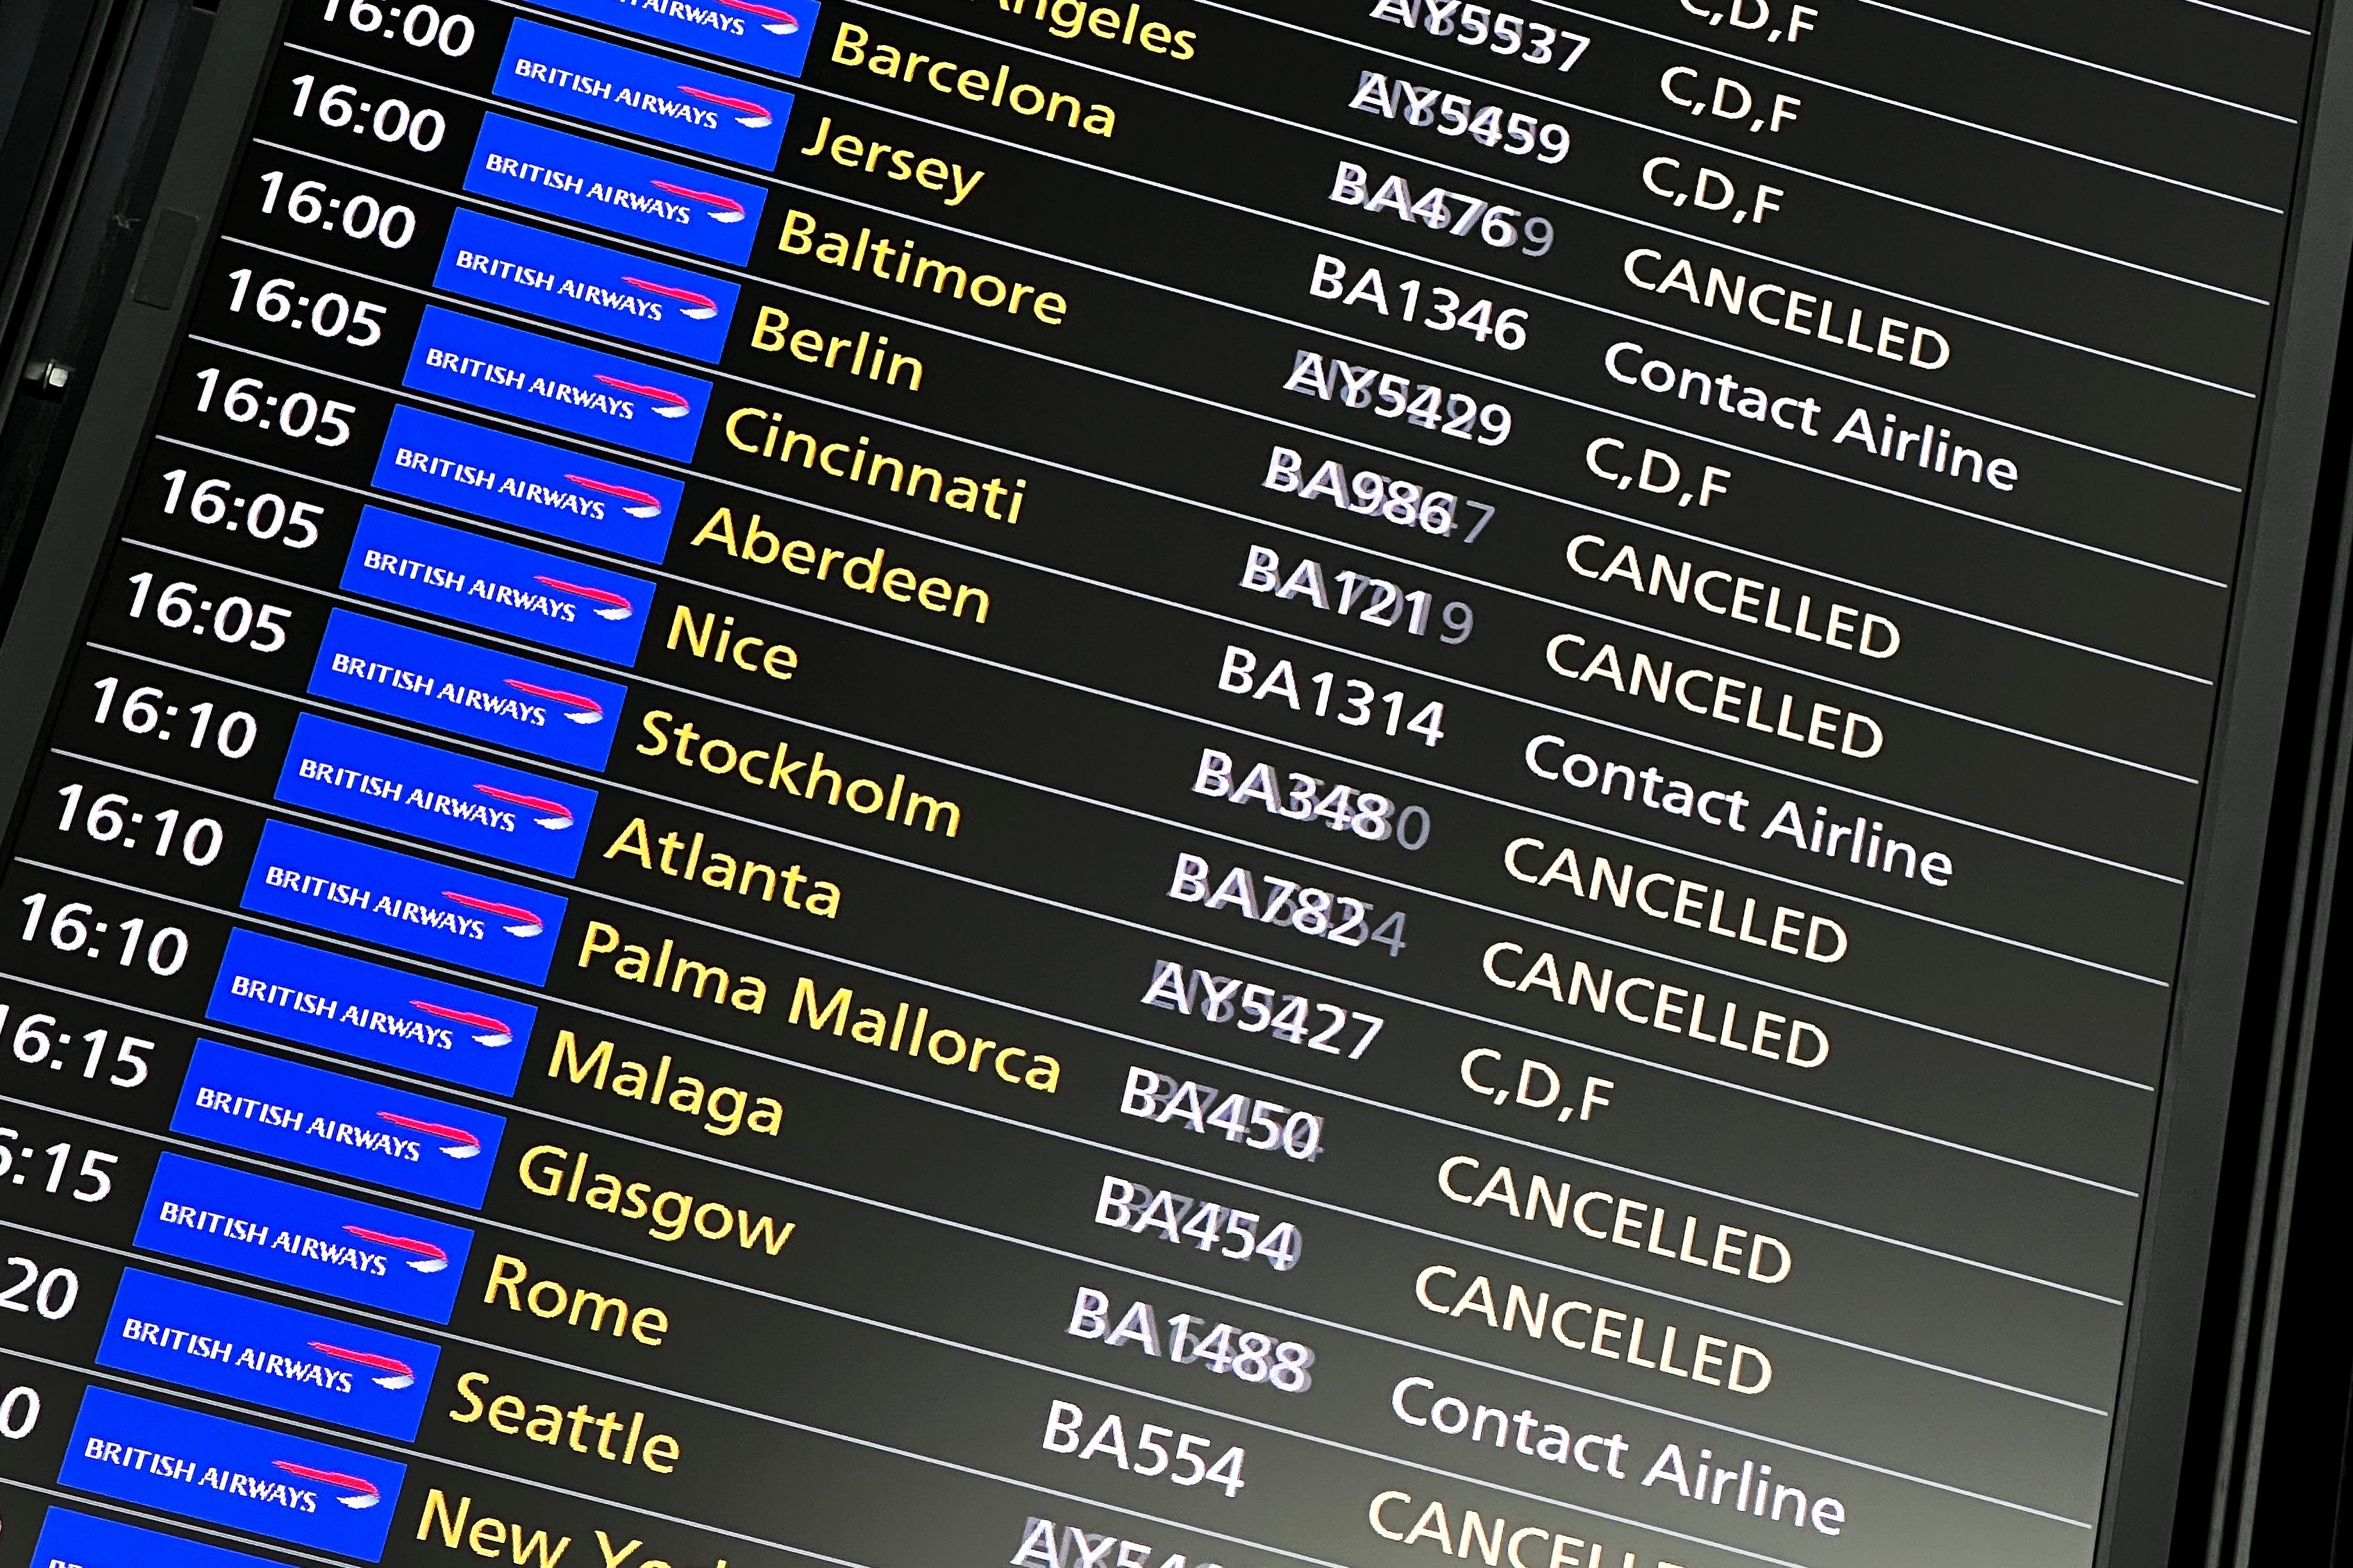 More than 1,200 flights were cancelled due to the outage on Monday